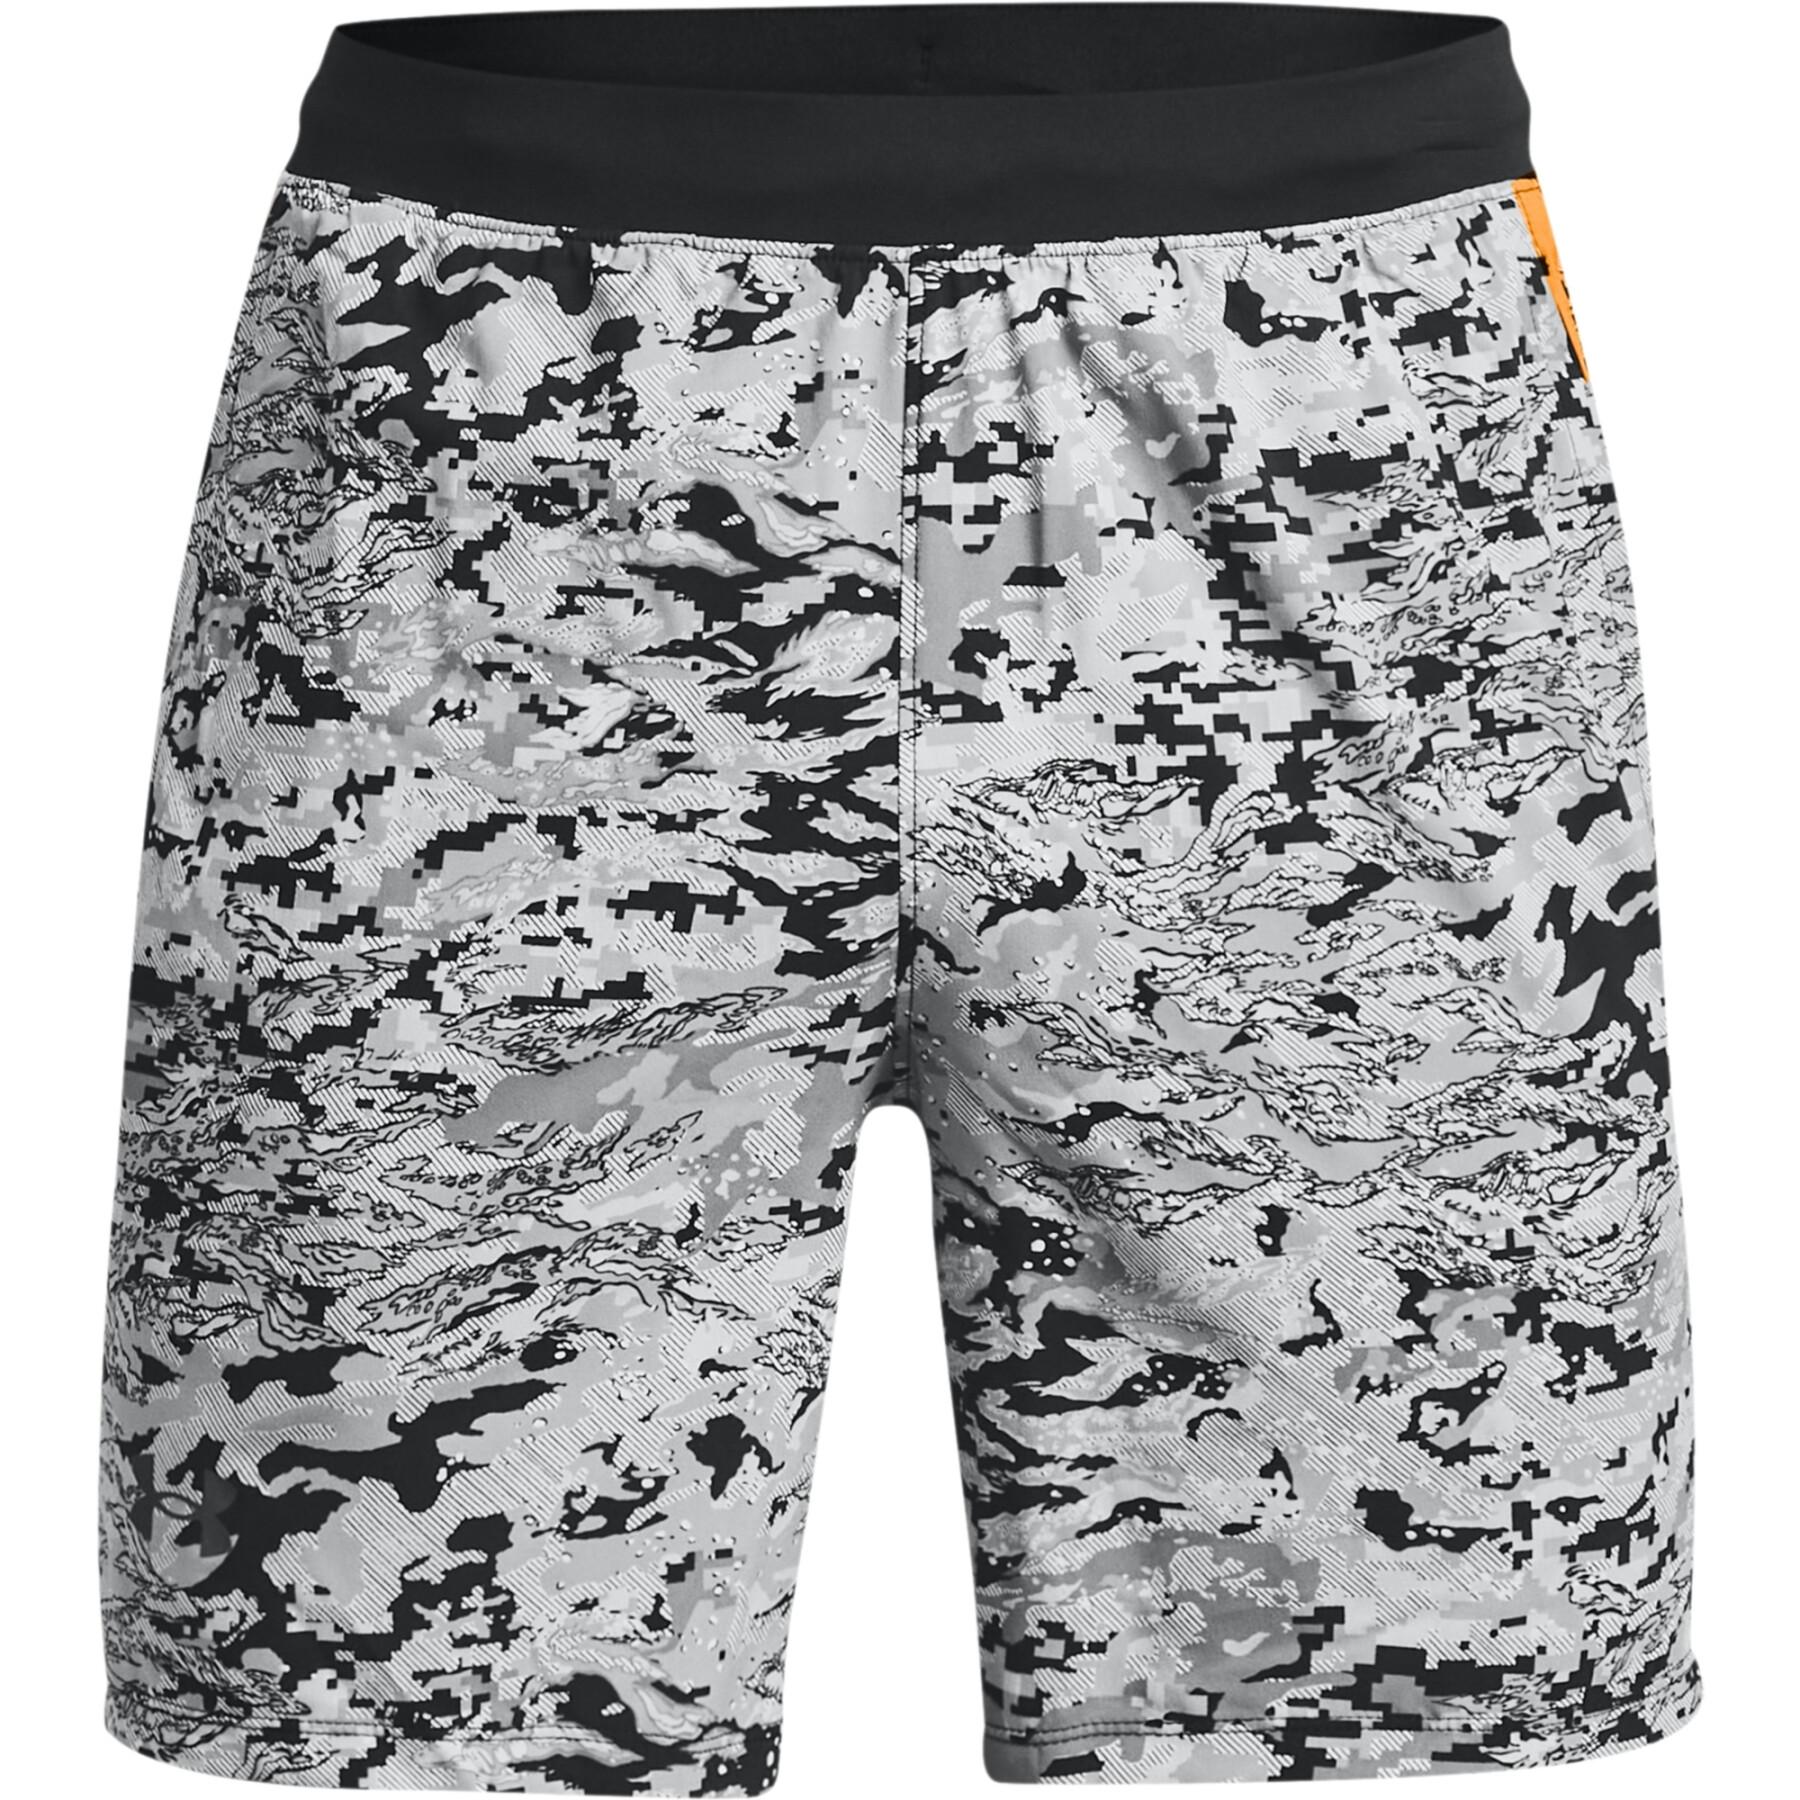 Short Under Armour Launch oob